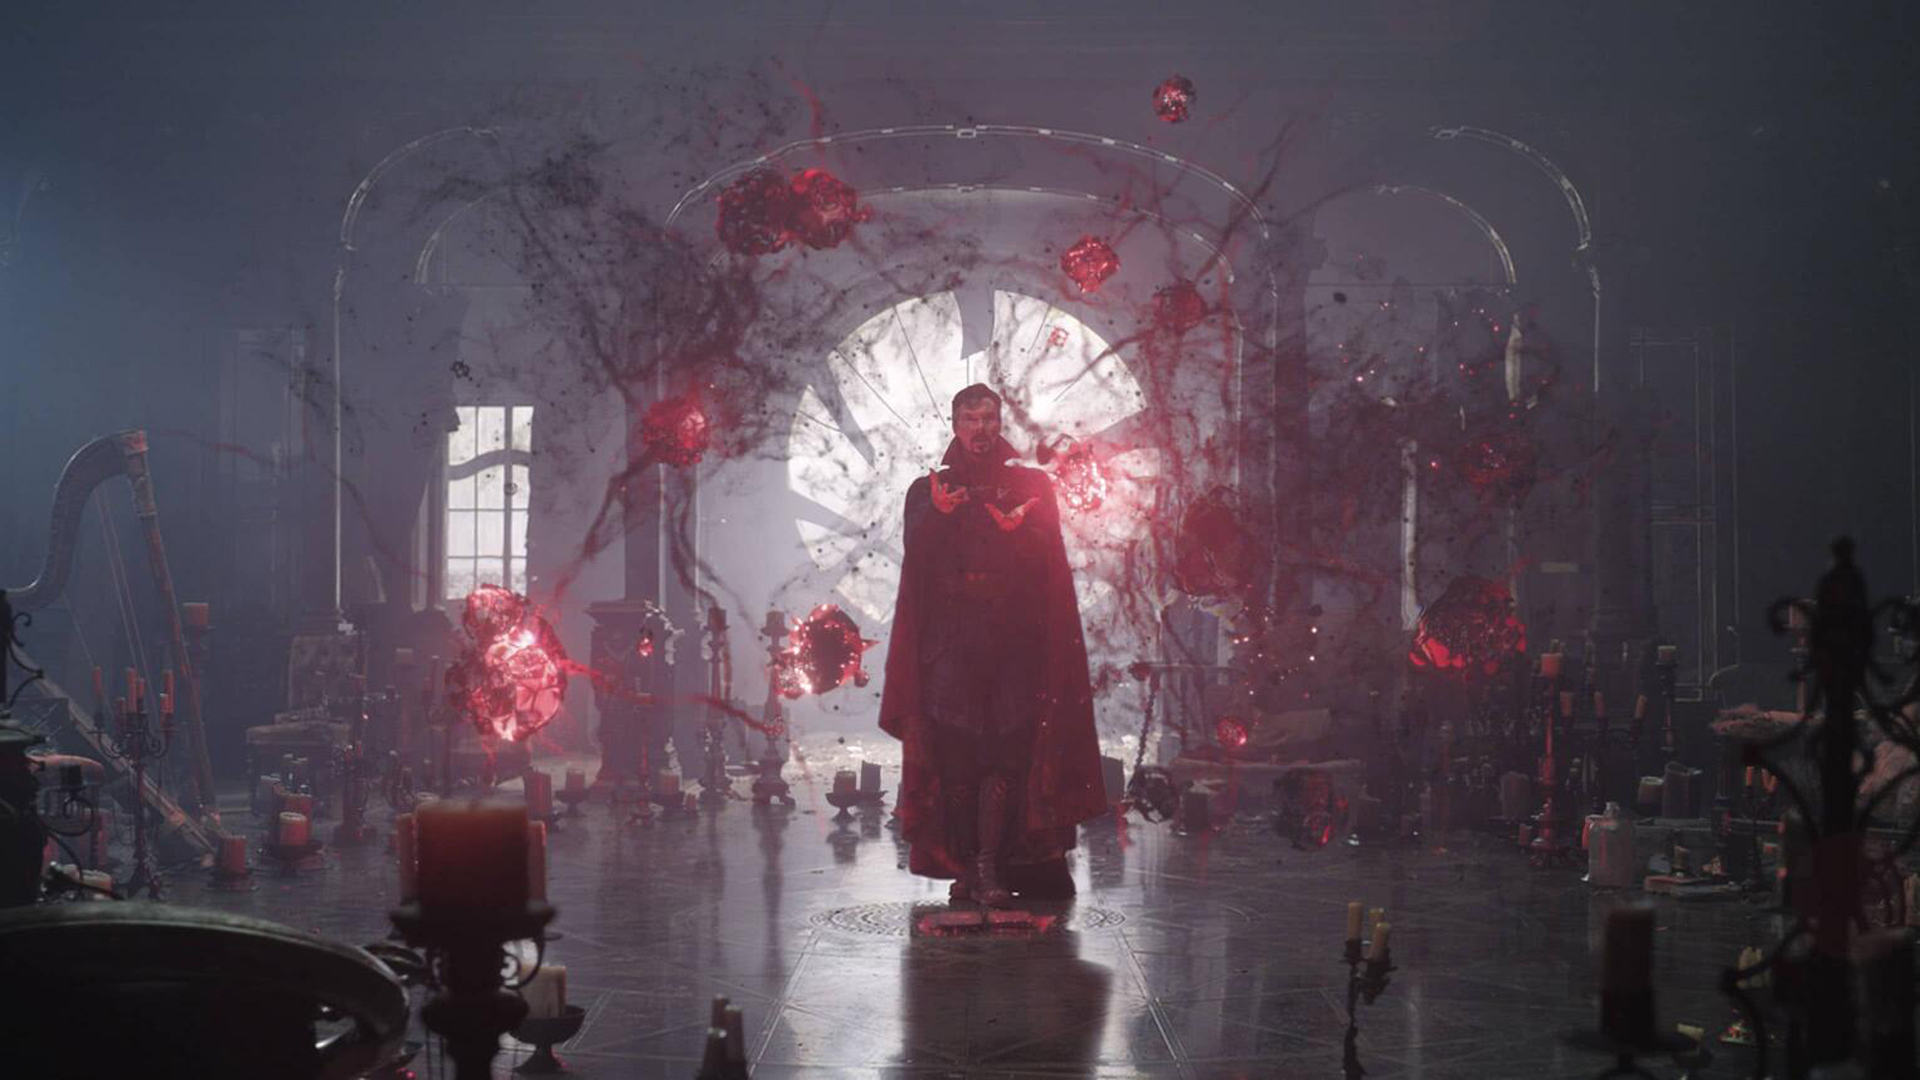 Evil Doctor Strange casts a spell in Doctor Strange in the Multiverse of Madness